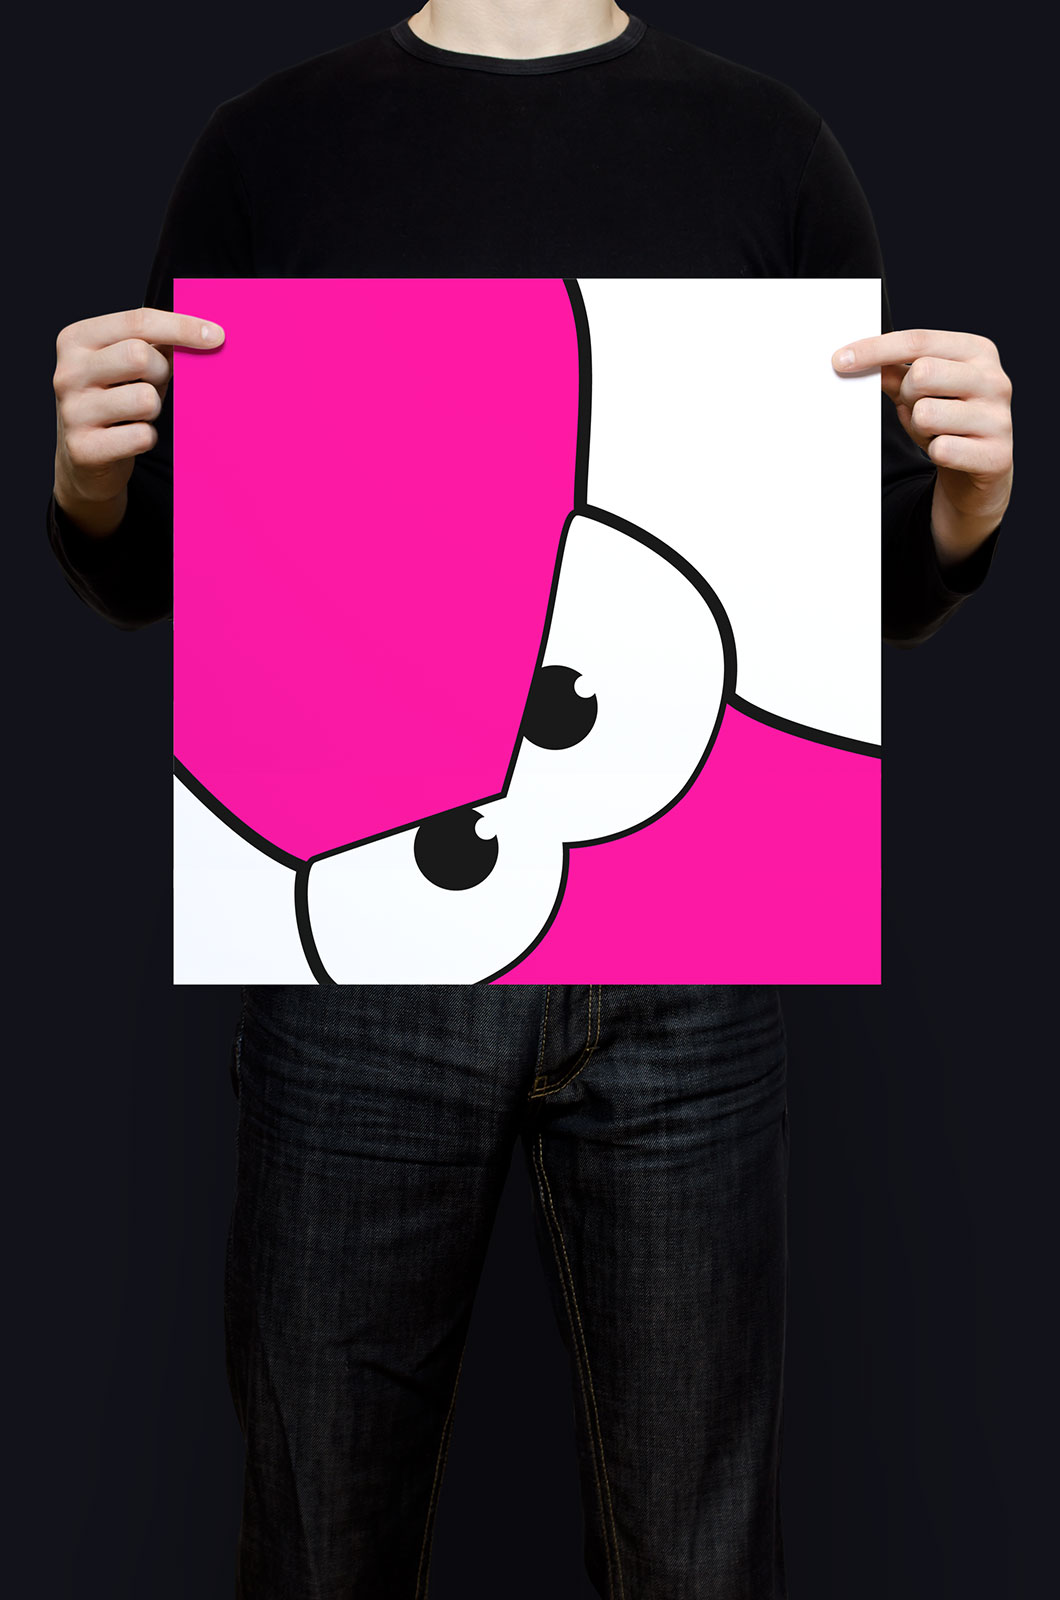 Alexander Glante - Works - The Pink Thing - 01